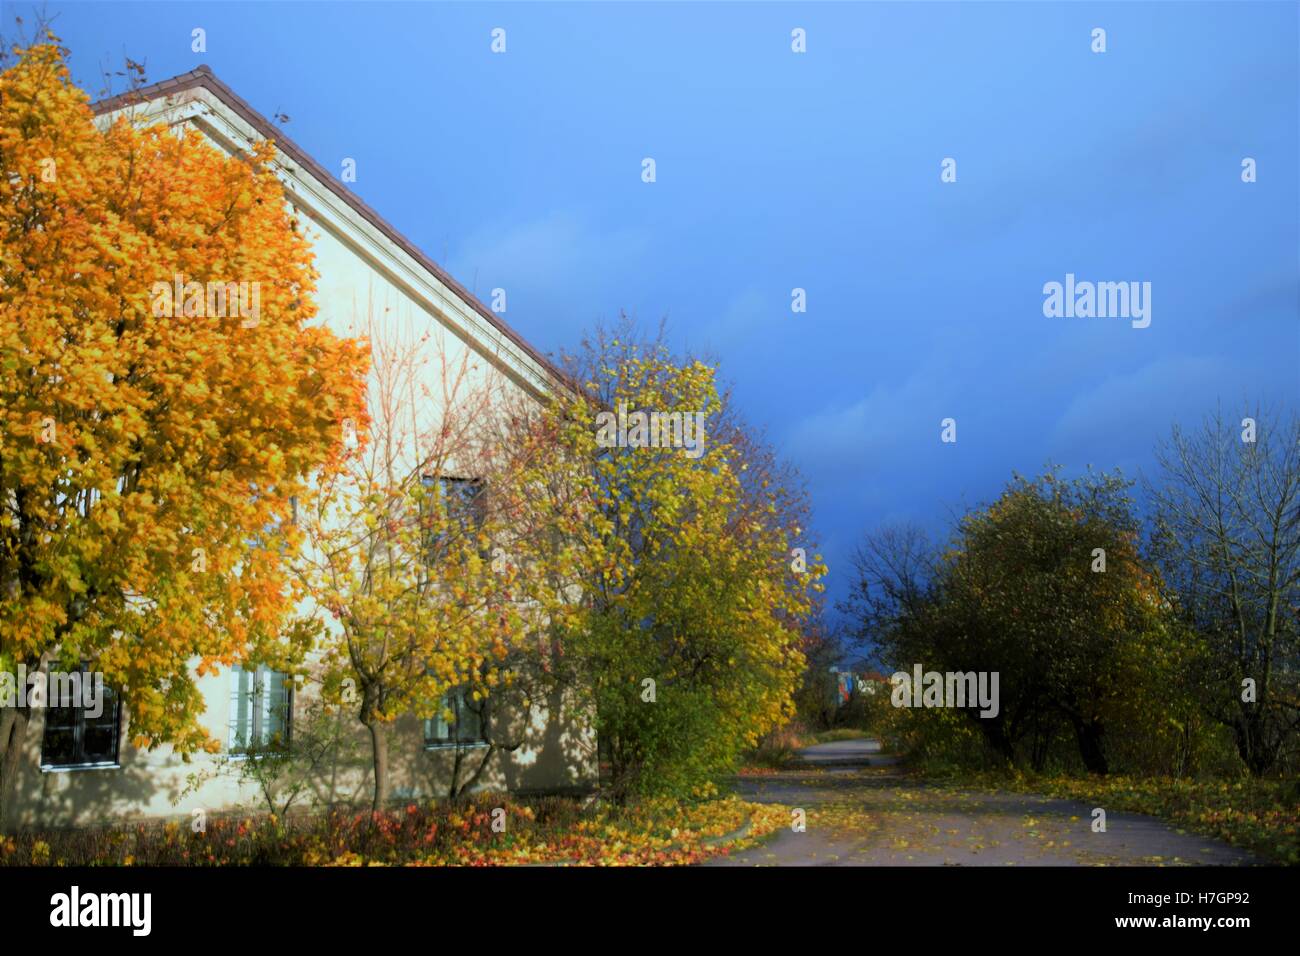 White house in colorful scenery Stock Photo